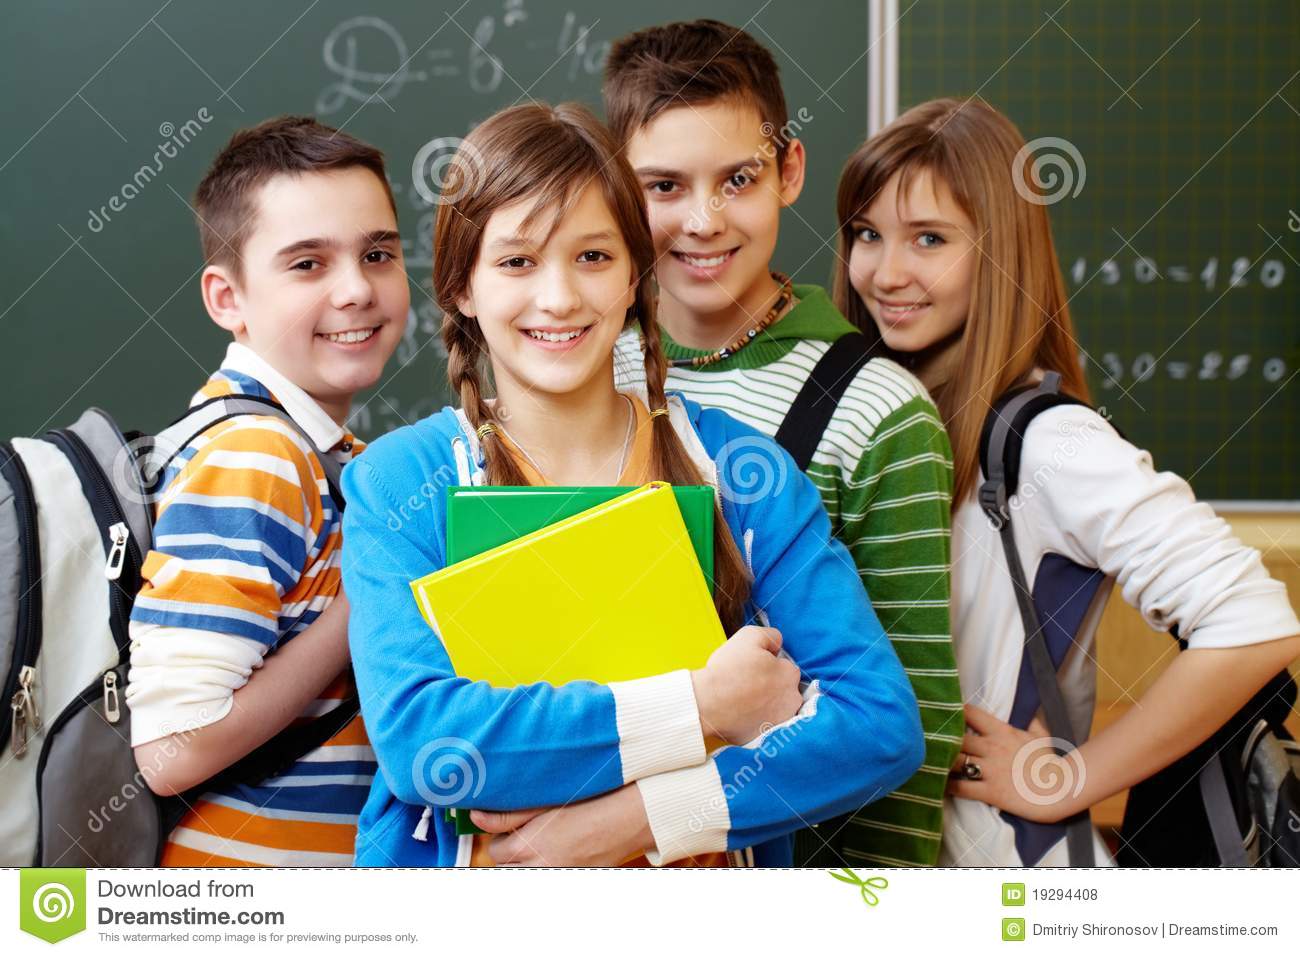 Royalty Free Stock Images Students